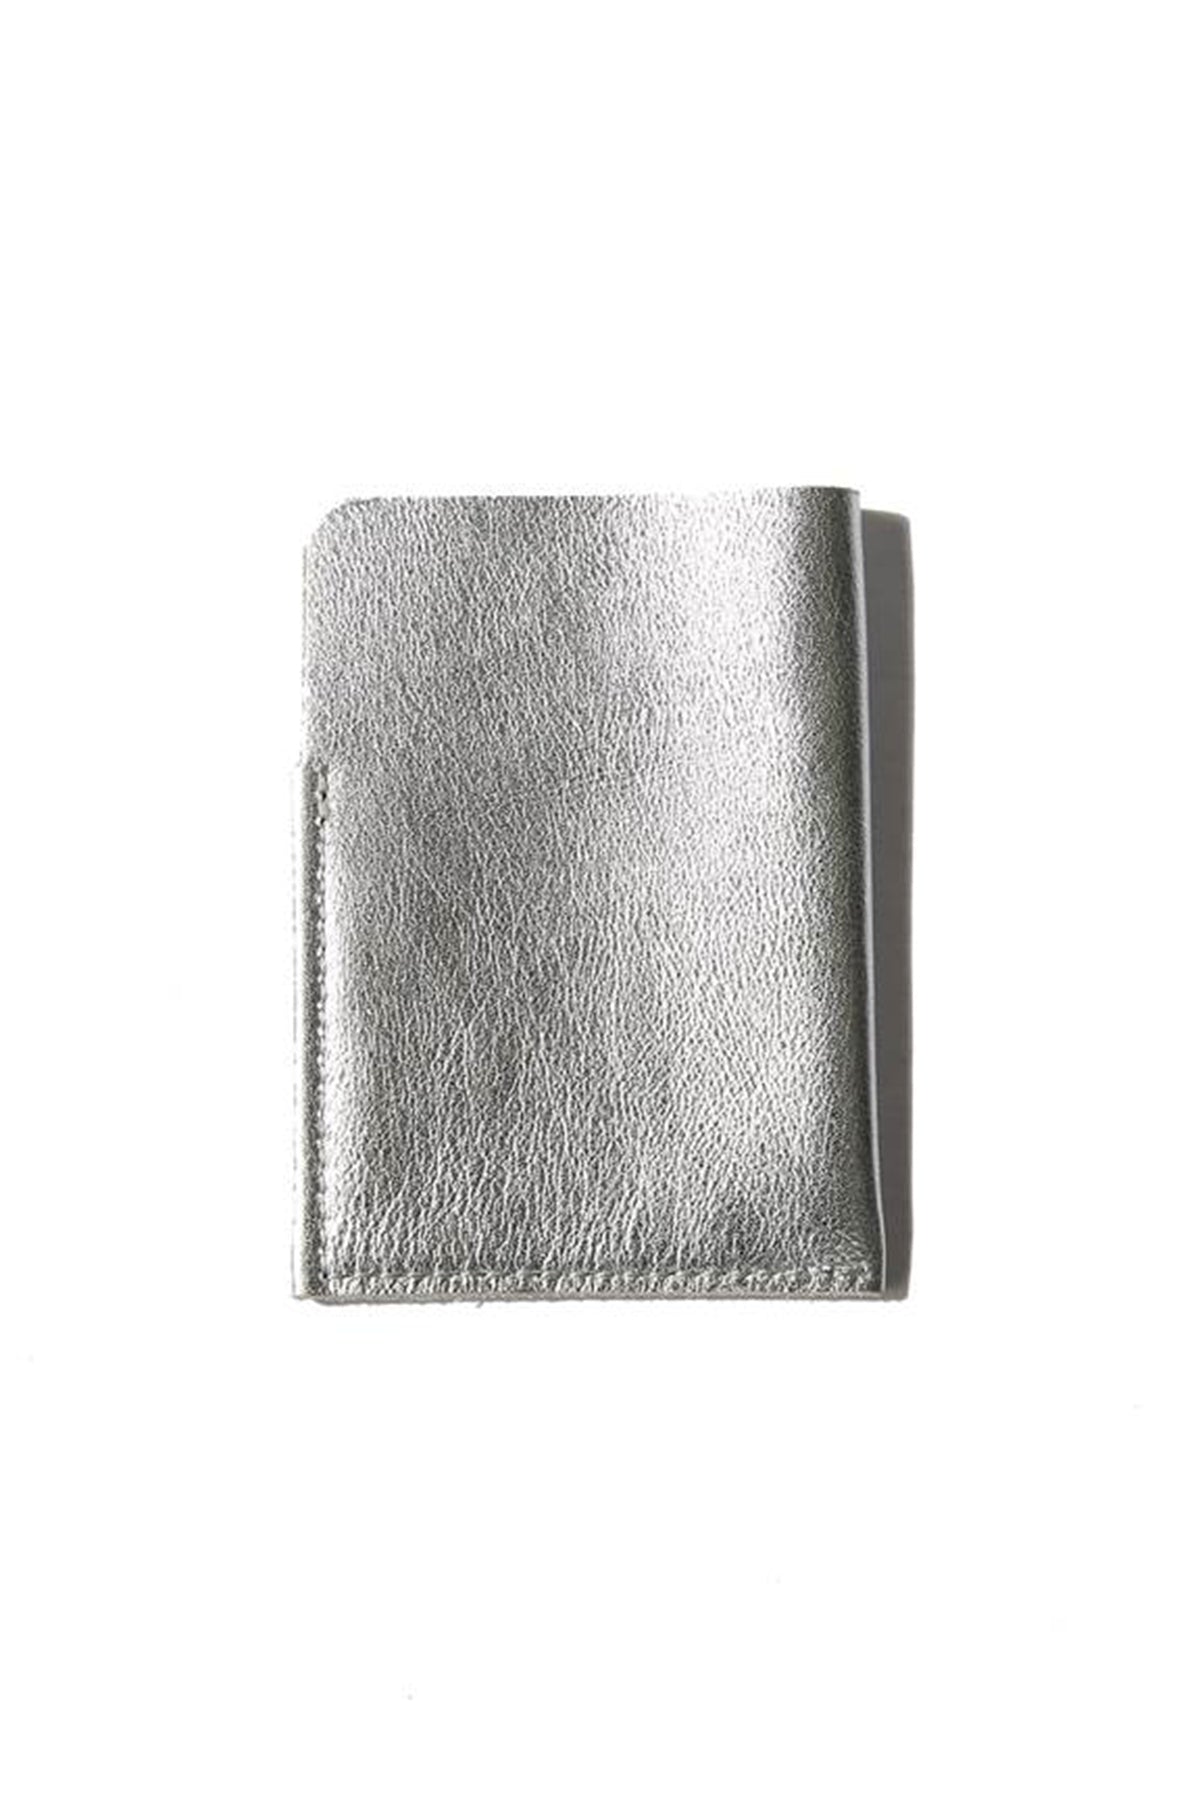 A minimalistic SOFT LEATHER CARD HOLDER BY LIMA SAGRADA, by a local artisan, placed on a white surface.-600106664017